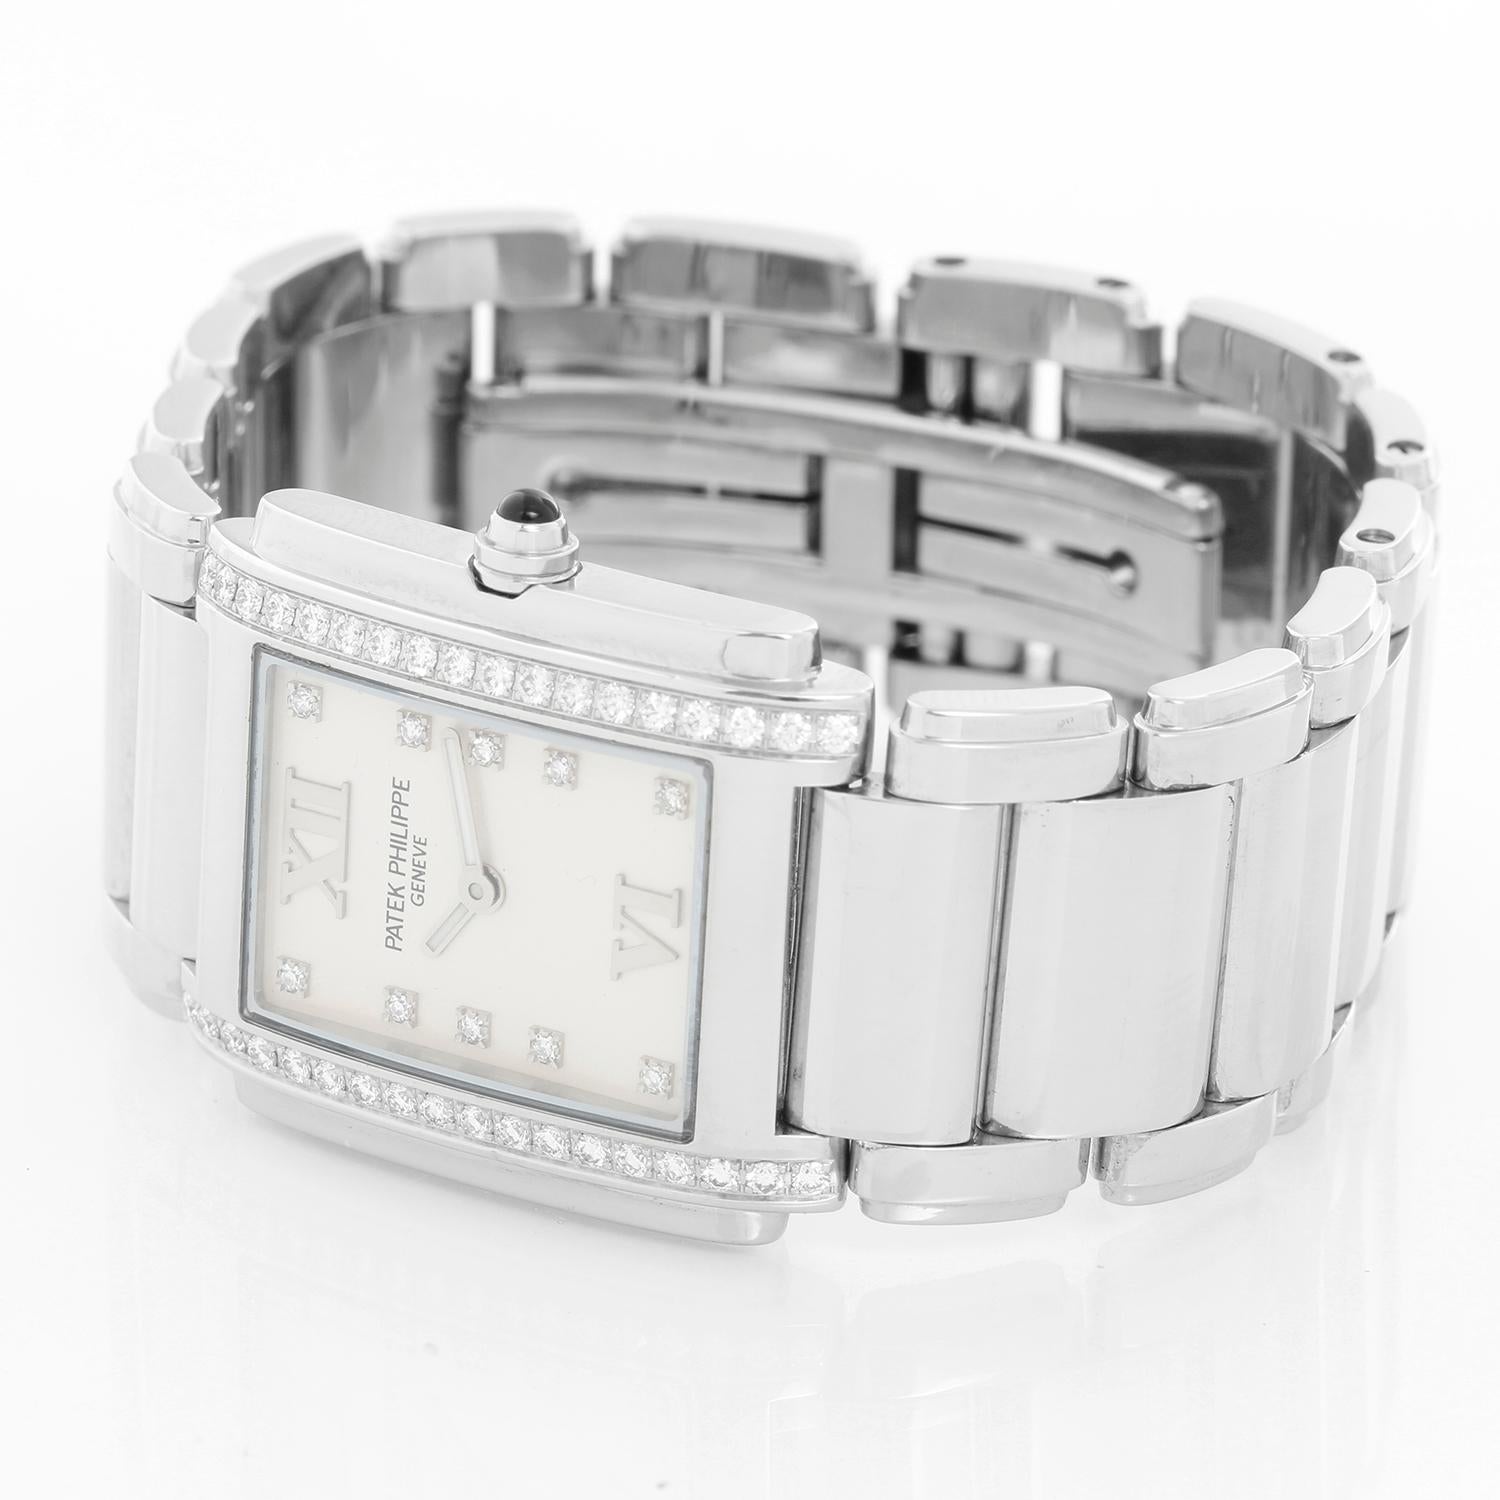 Ladies Patek Philippe Twenty-4 Watch Stainless Steel White Dial Watch 4910/10A - Quartz. Stainless steel case with diamond bezel (25mm x 30mm). White dial with diamond markers and Roman numerals at 12 & 6. Stainless steel Patek Philippe link